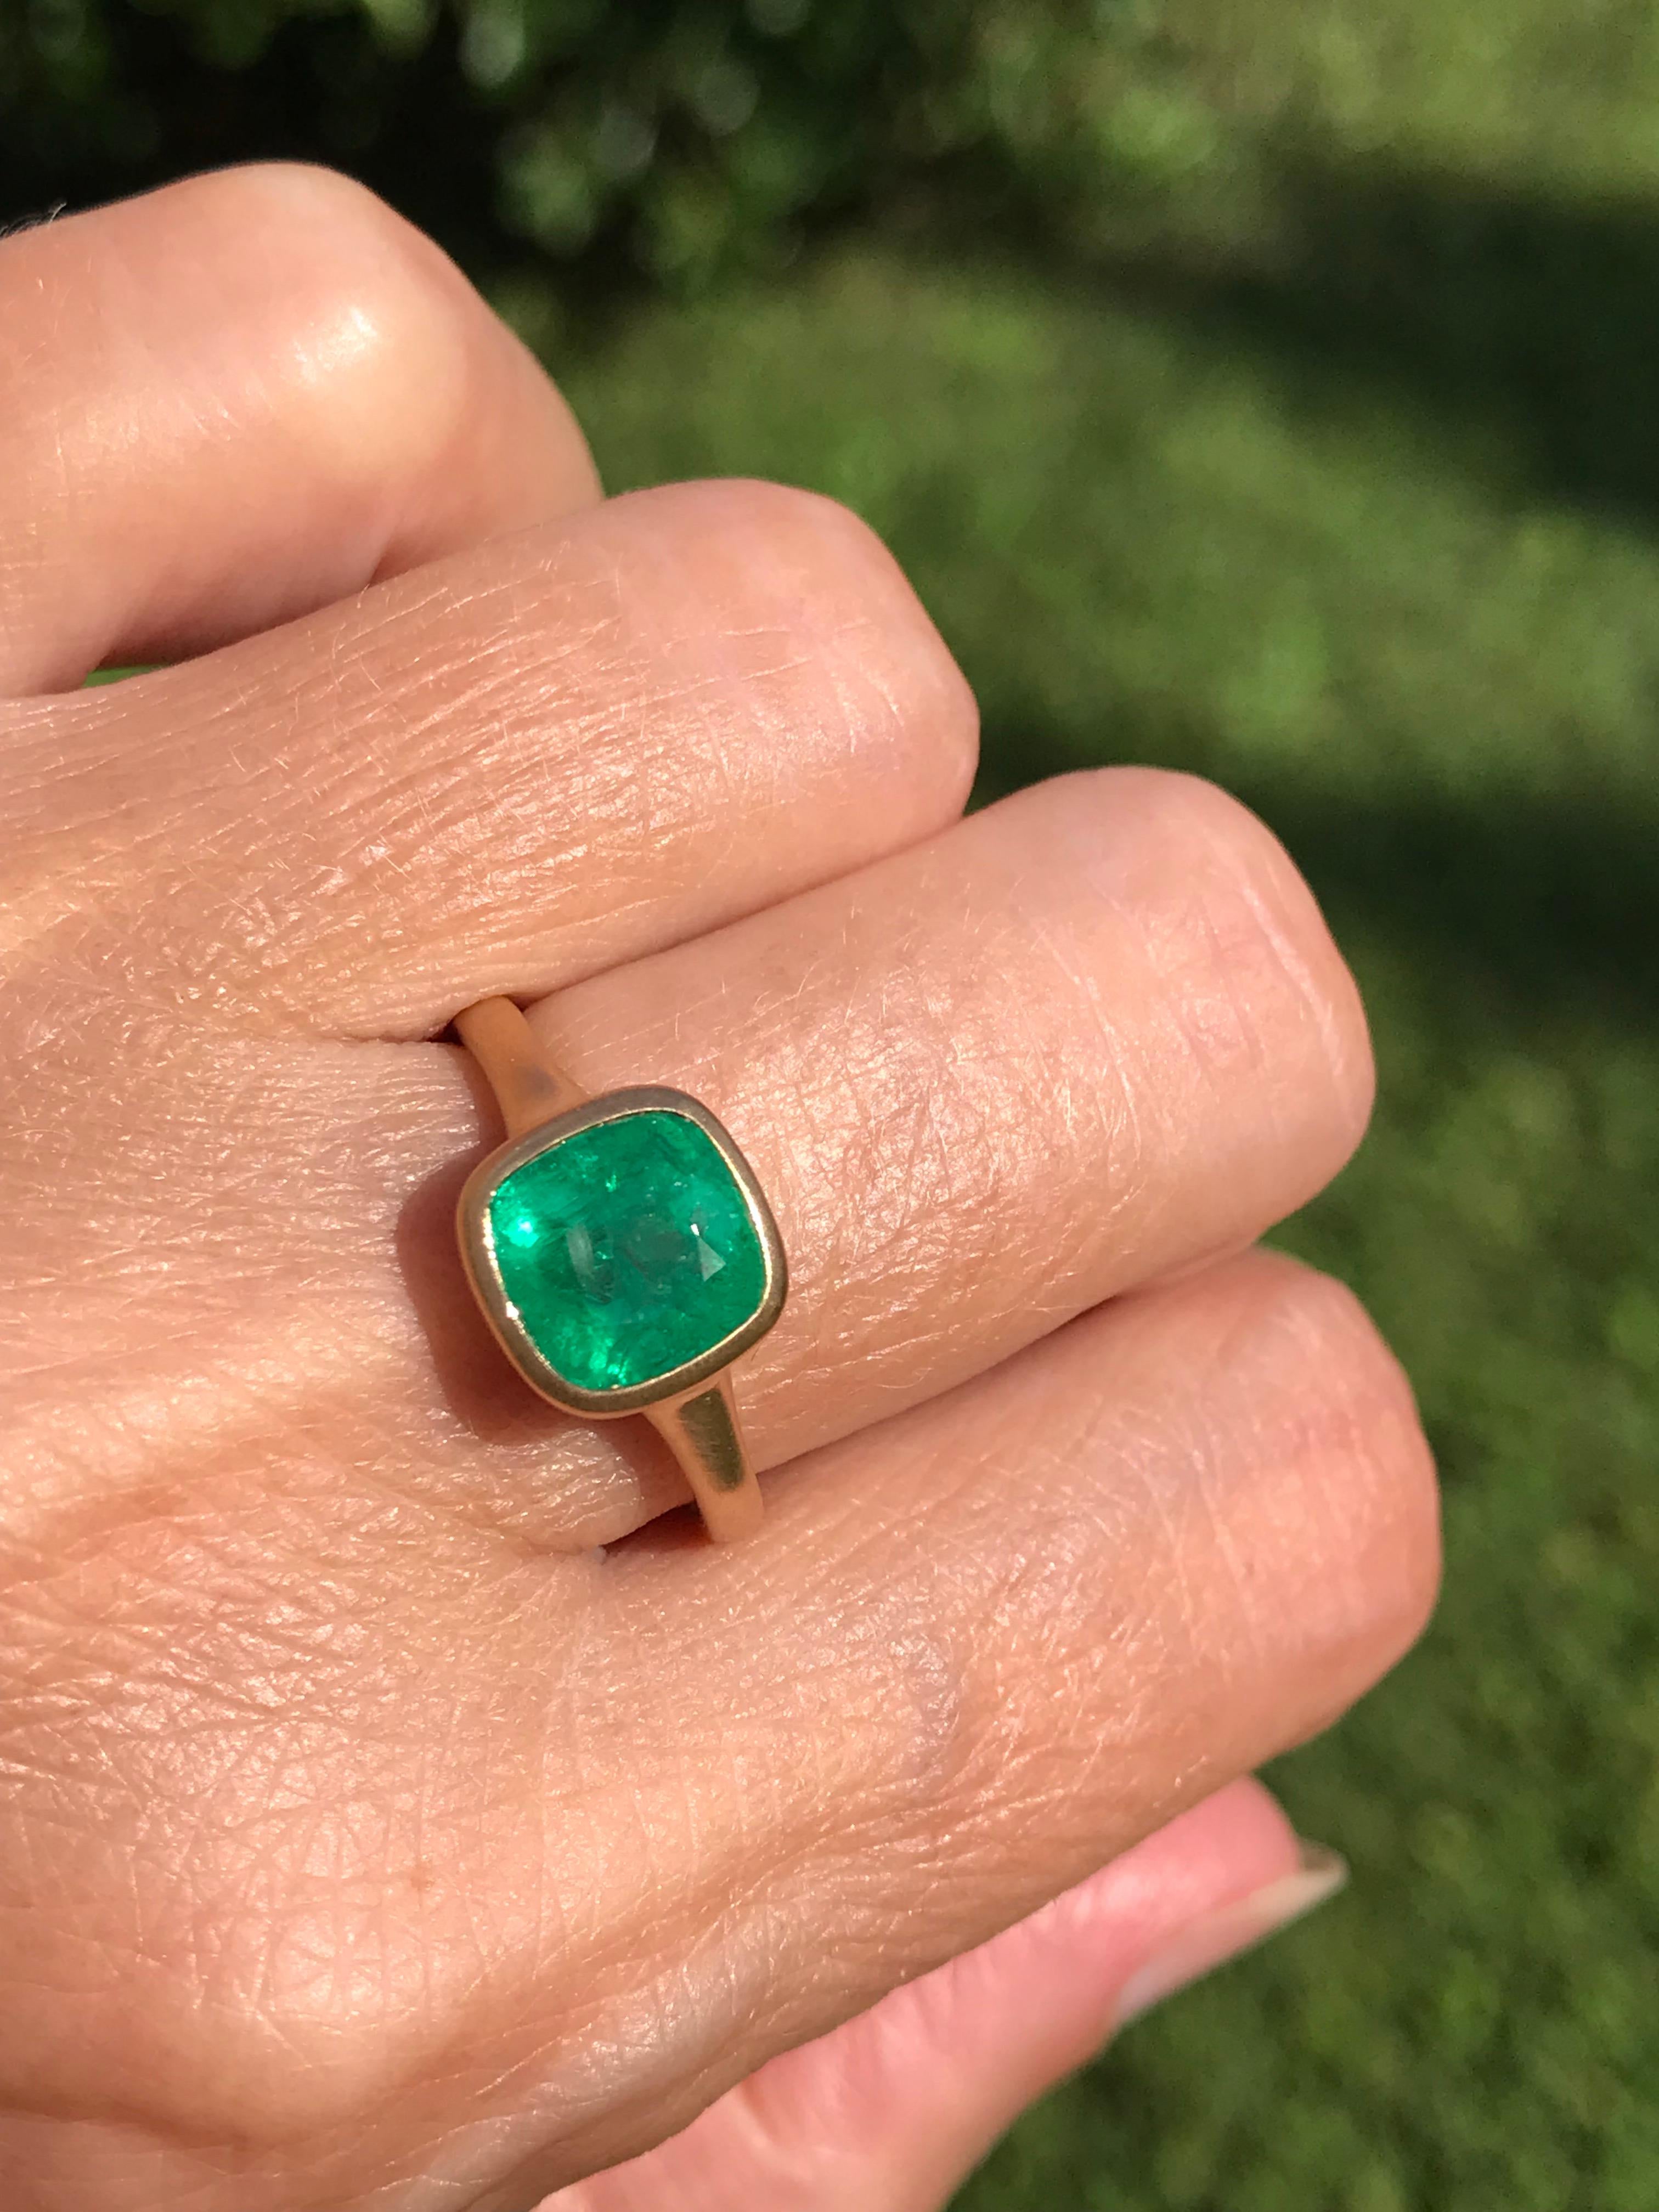 Dalben design One of a Kind 18k yellow gold matte finishing ring with a 2,84 carat bezel-set cushion cut emerald. 
Ring size 7 1/4 USA - EU 55 re-sizable to most finger sizes. 
Bezel stone dimensions :
width 9,7 mm
height 9,4 mm
The ring has been